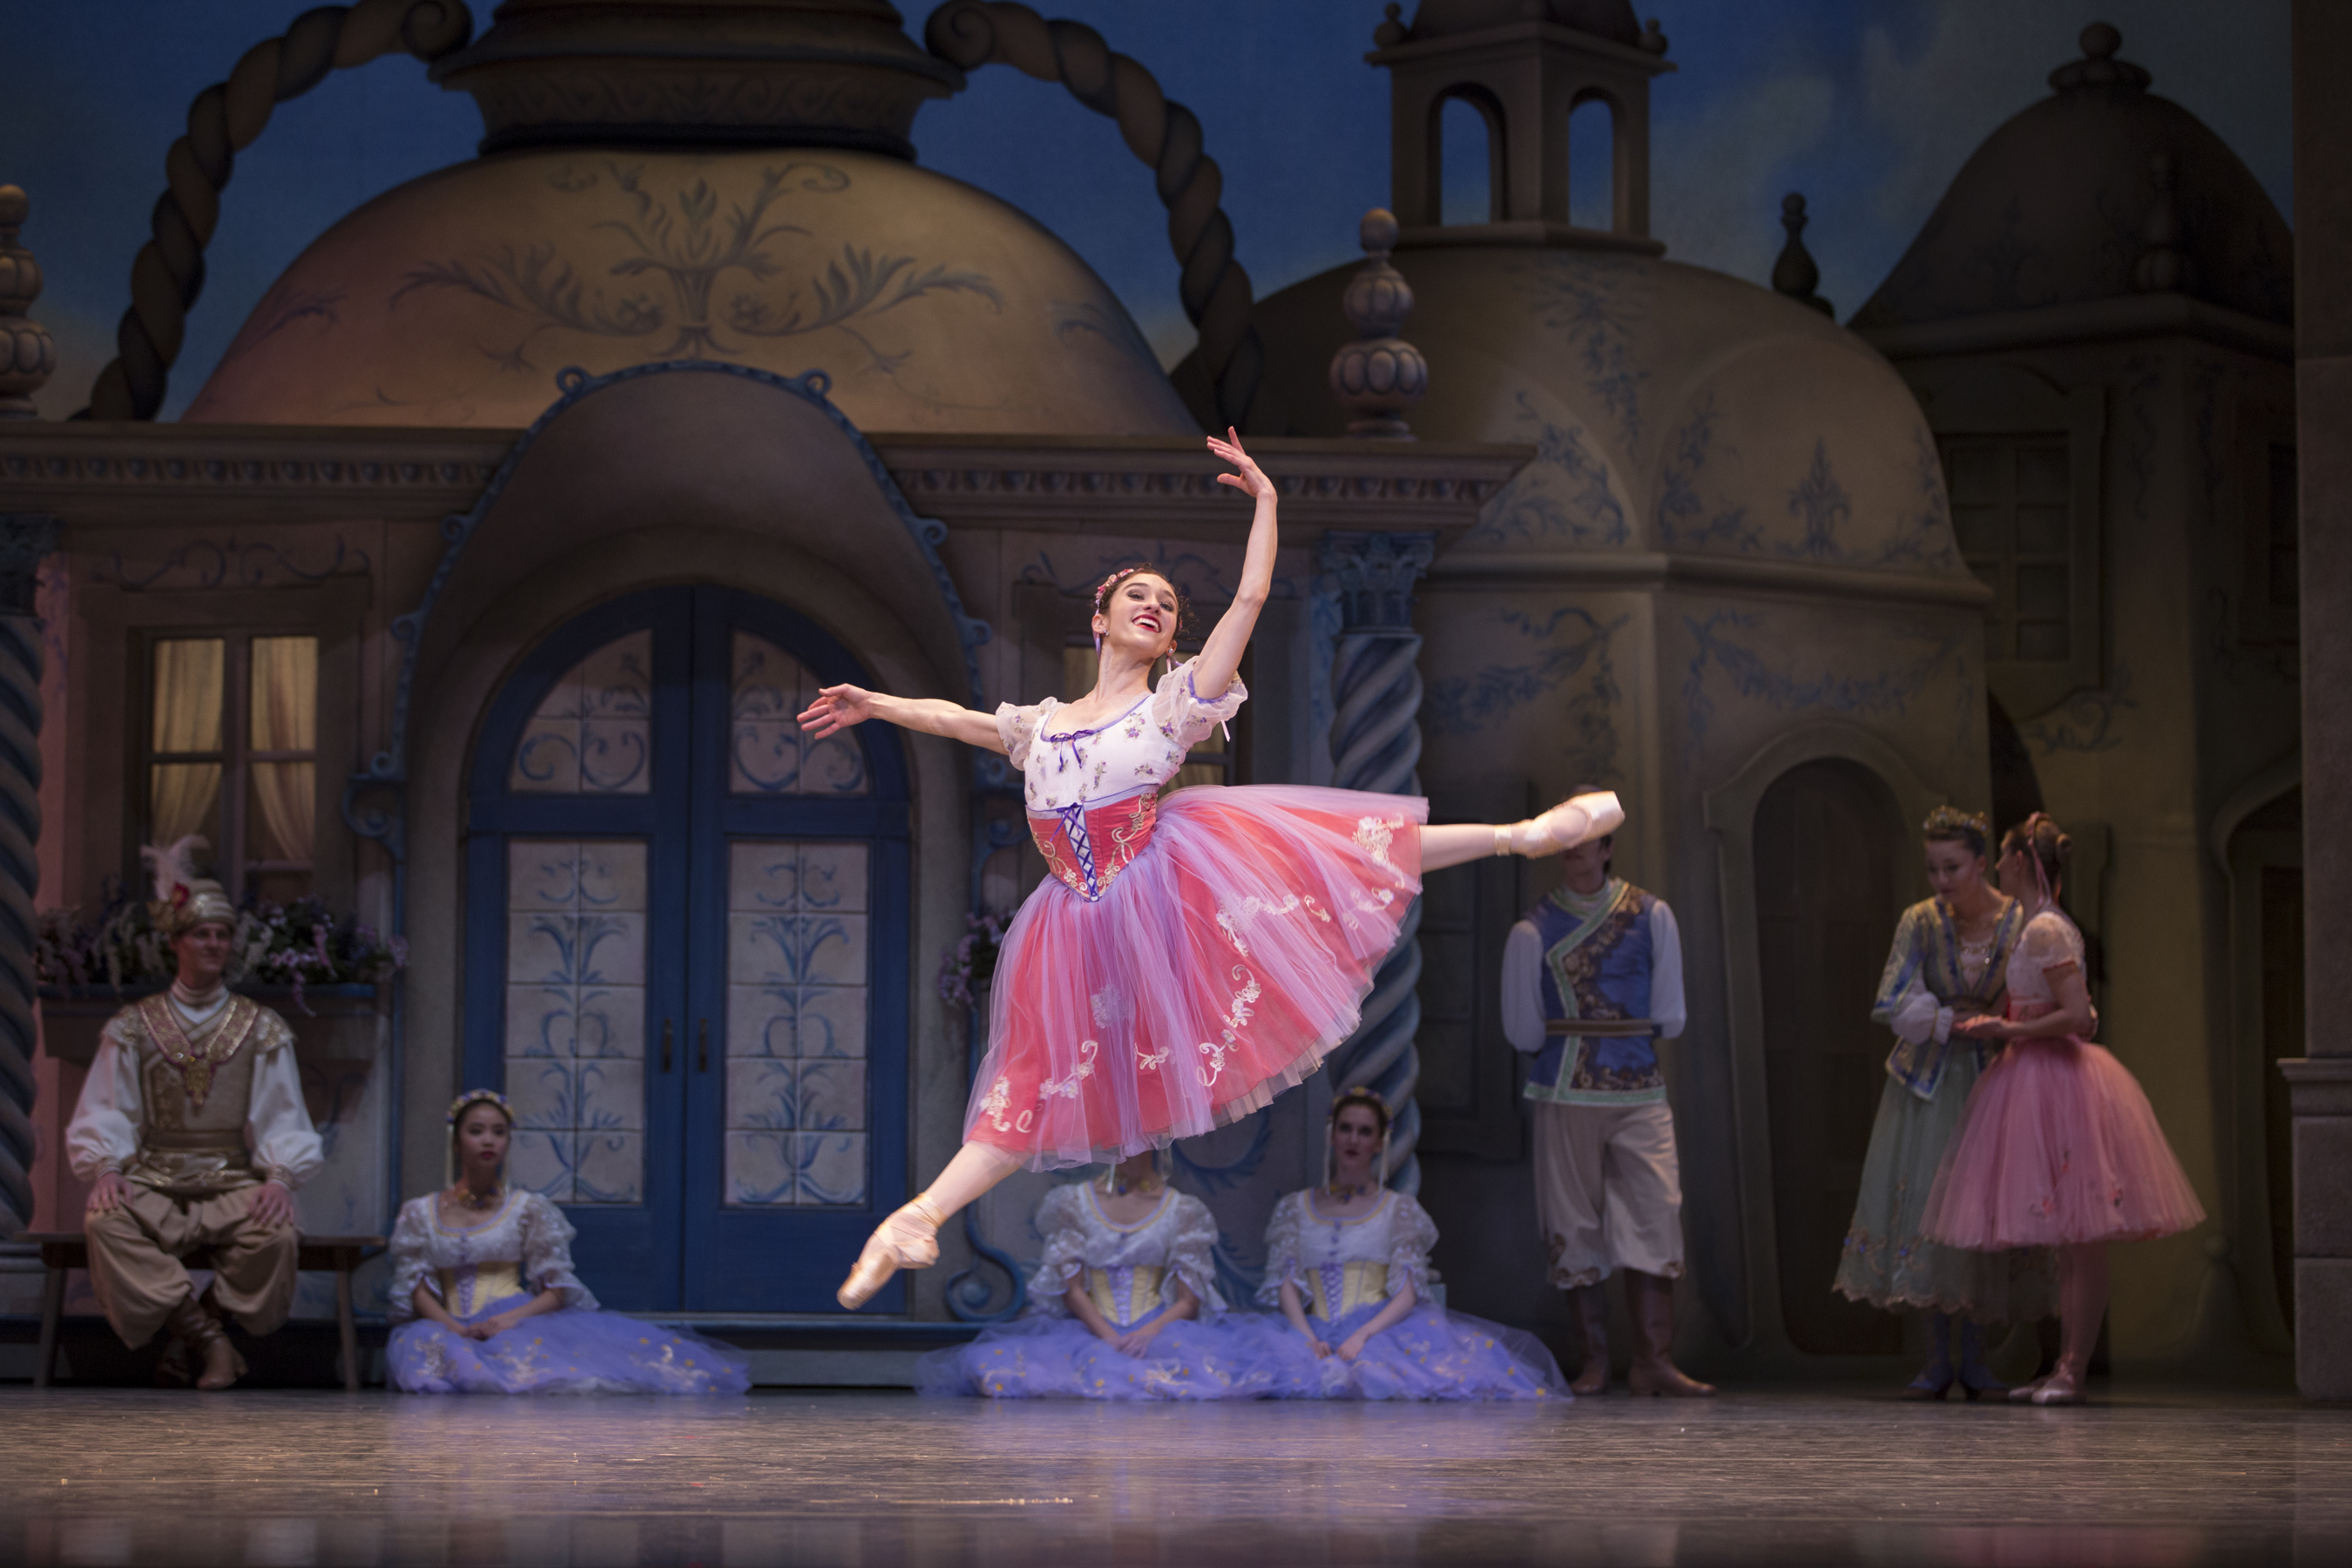 Pacific Northwest Ballet soloist Leta Biasucci with company dancers in Coppélia, choreographed by Alexandra Danilova and George Balanchine © The George Balanchine Trust. PNB presents Coppélia through April 24, 2016. Photo © Angela Sterling.